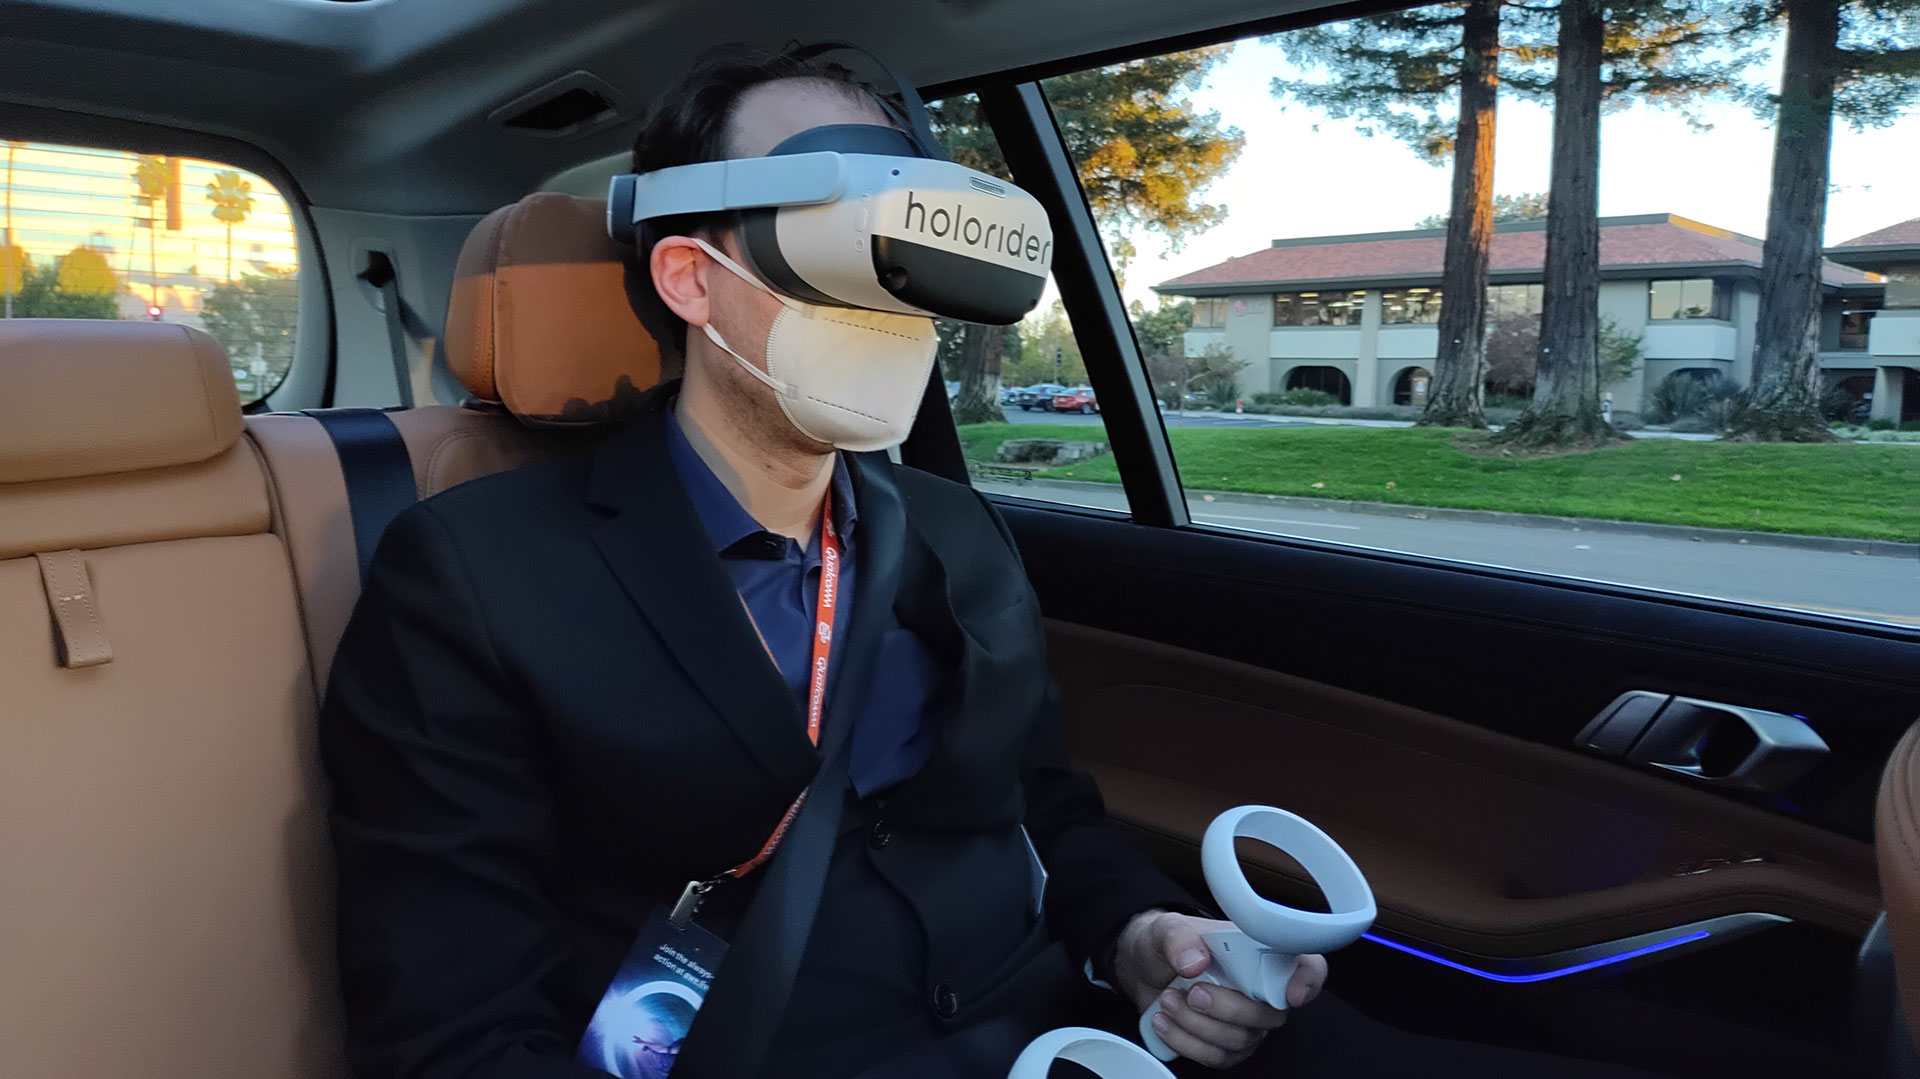 AWE 2021: Hands-on with Holoride and its automotive VR fun